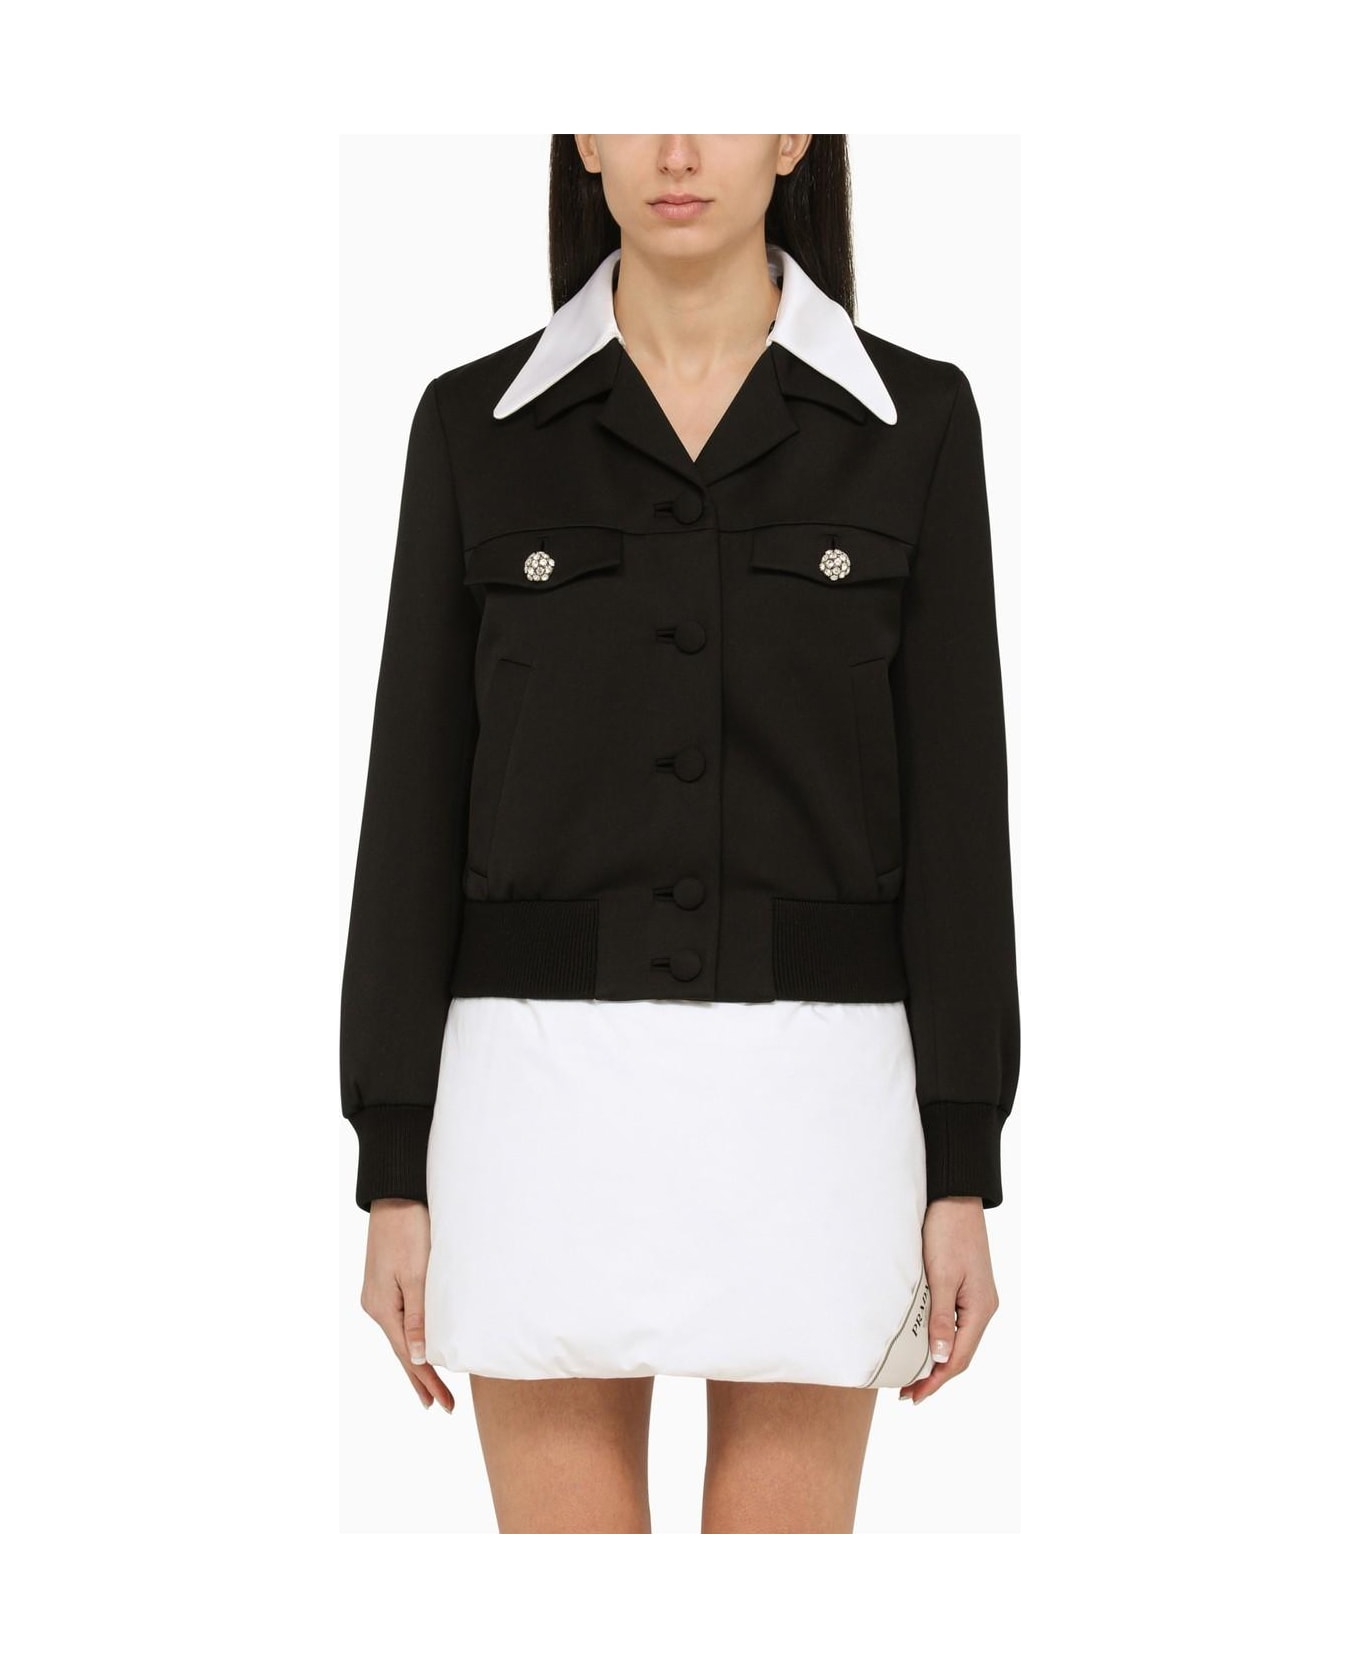 Prada Black Wool Single-breasted Jacket With Jewelled Buttons - Nero